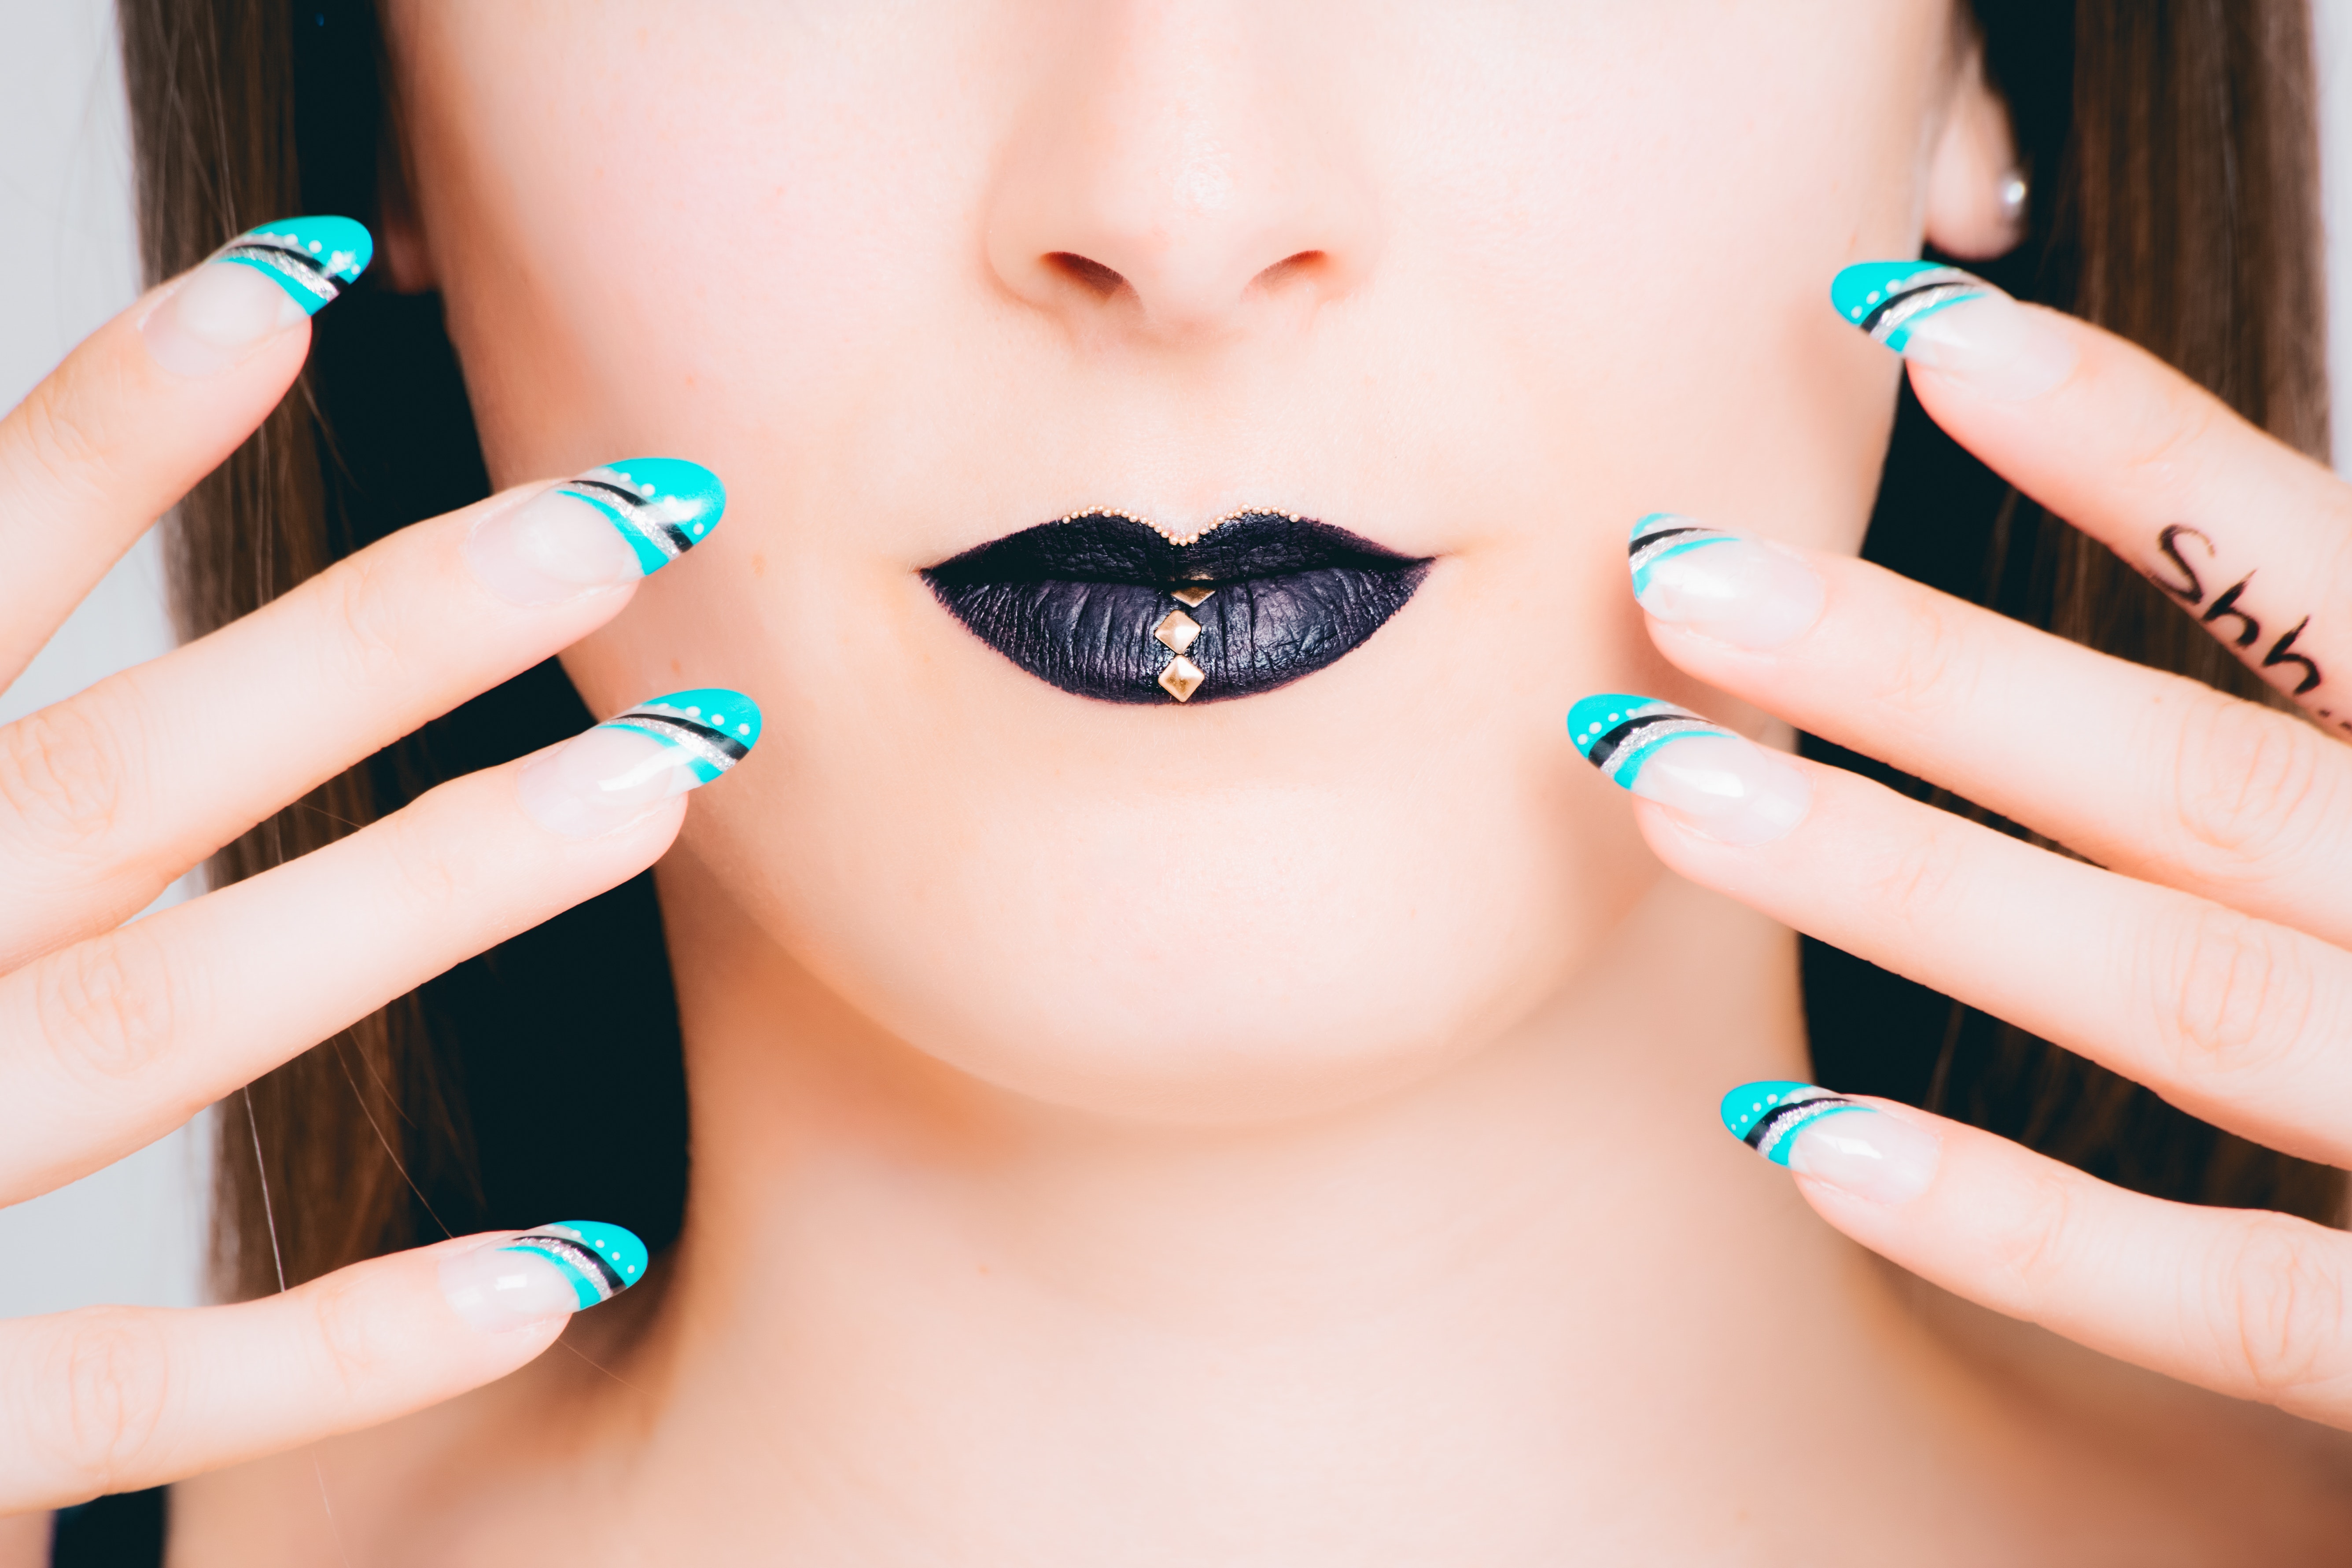 Teal, Black, and White Nail Art, Beauty, Model, Woman, Style, HQ Photo